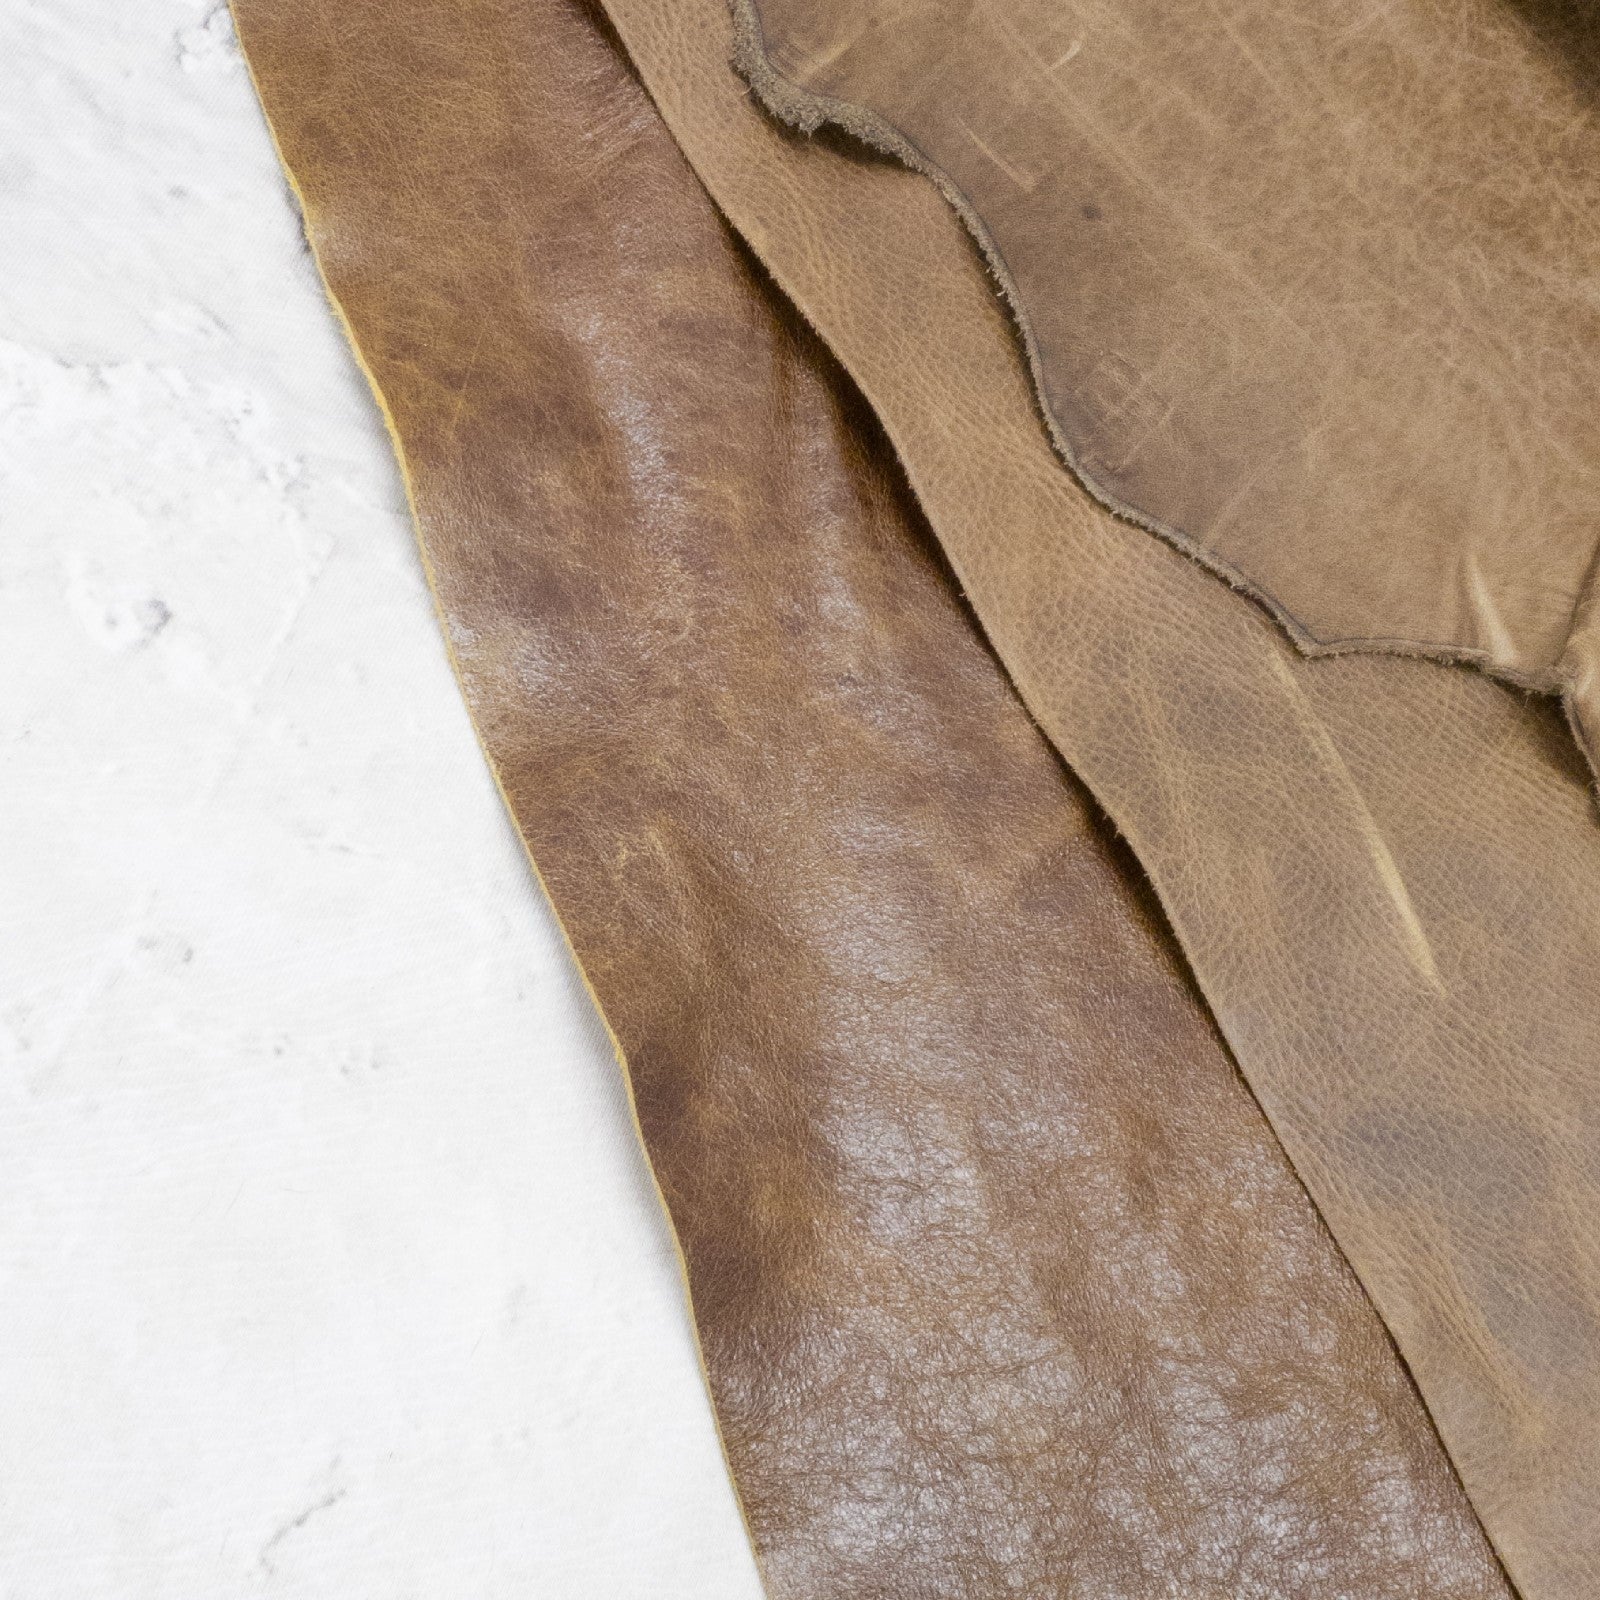 Light-Medium Brown, 2-4 oz, 3-10 Sq Ft, Upholstery Cow Project Pieces,  | The Leather Guy